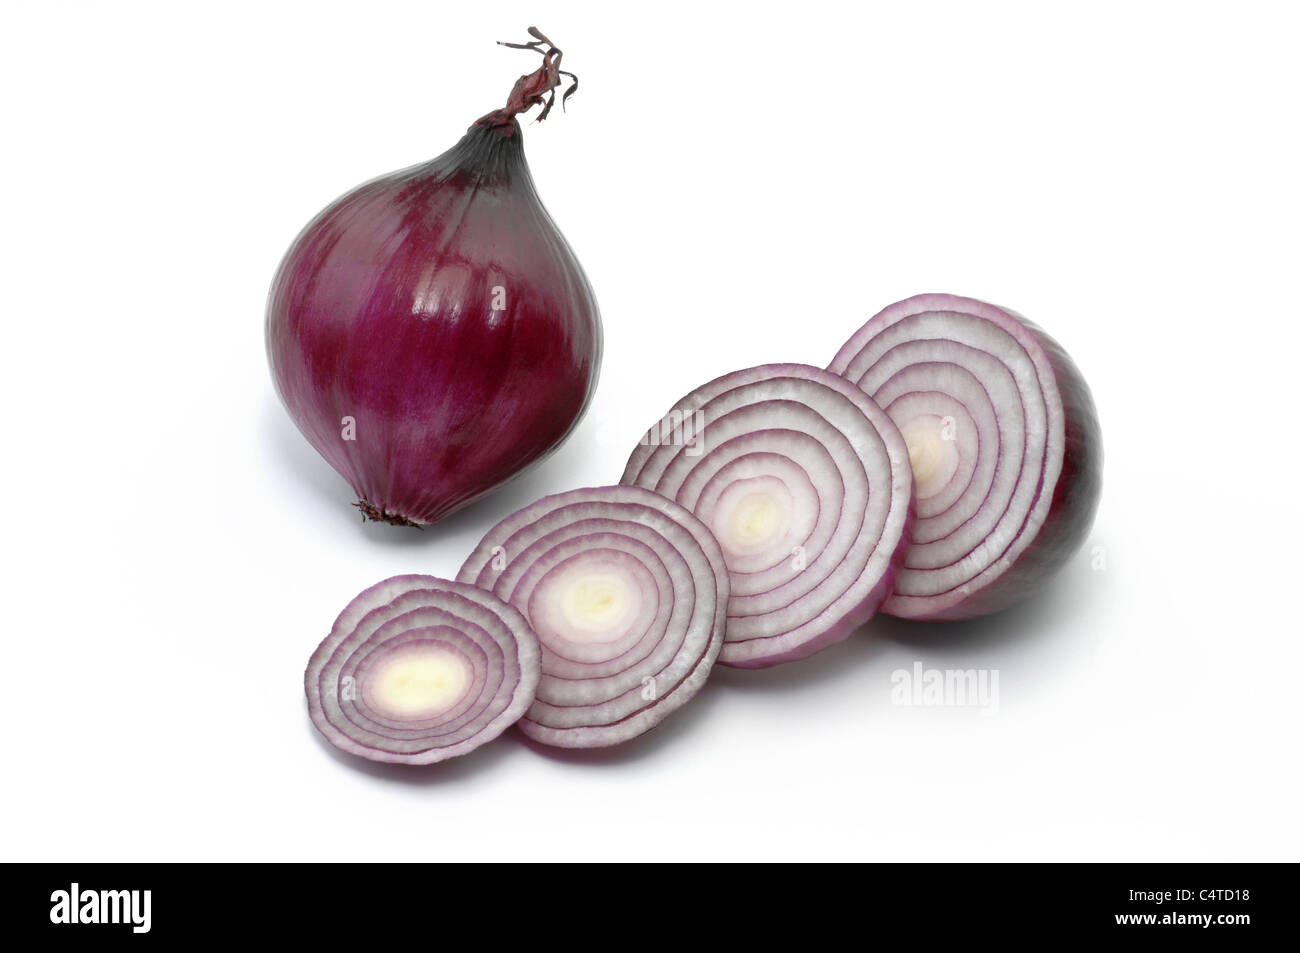 Garden Onion (Allium cepa). Red onion, whole and sliced. Studio picture against a white background. Stock Photo